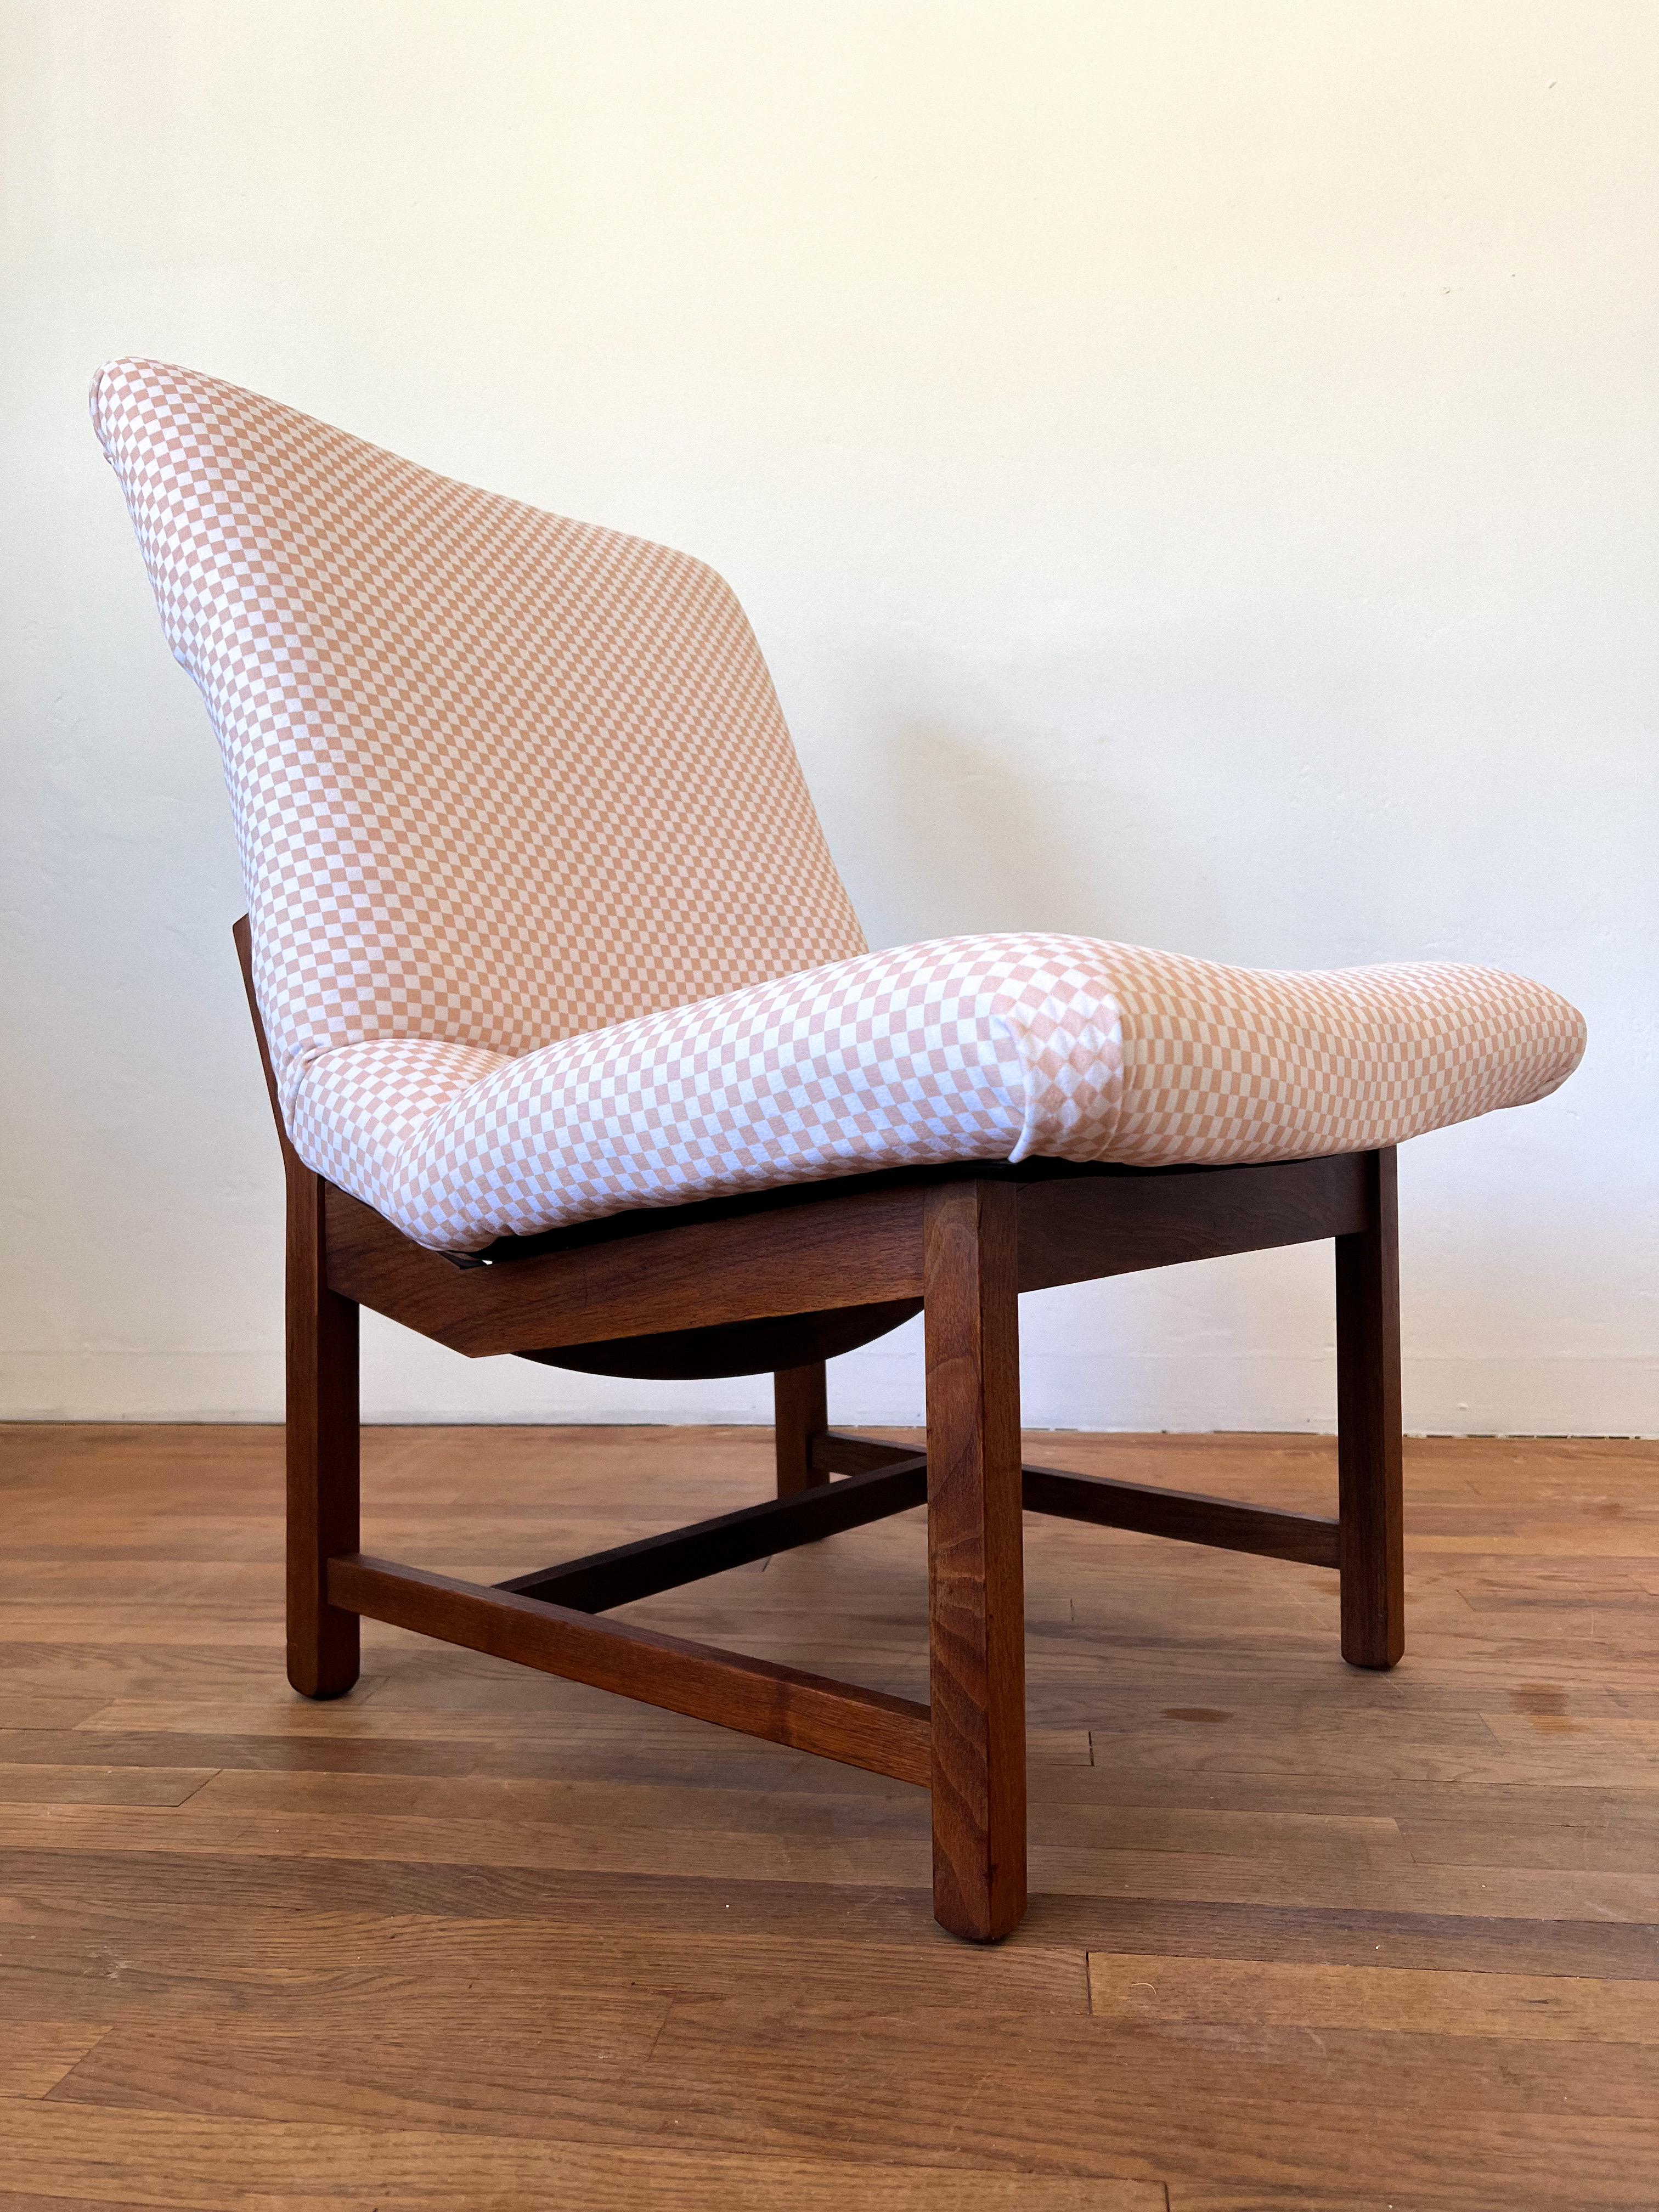 Mid Century Modern slipper lounge chair in the style of Jens Risom. Newly re-upholstered in an off white/cream checkered fabric. One of the most comfortable chairs you will ever sit in. The fabric is extremely soft and high quality. The Risom lines